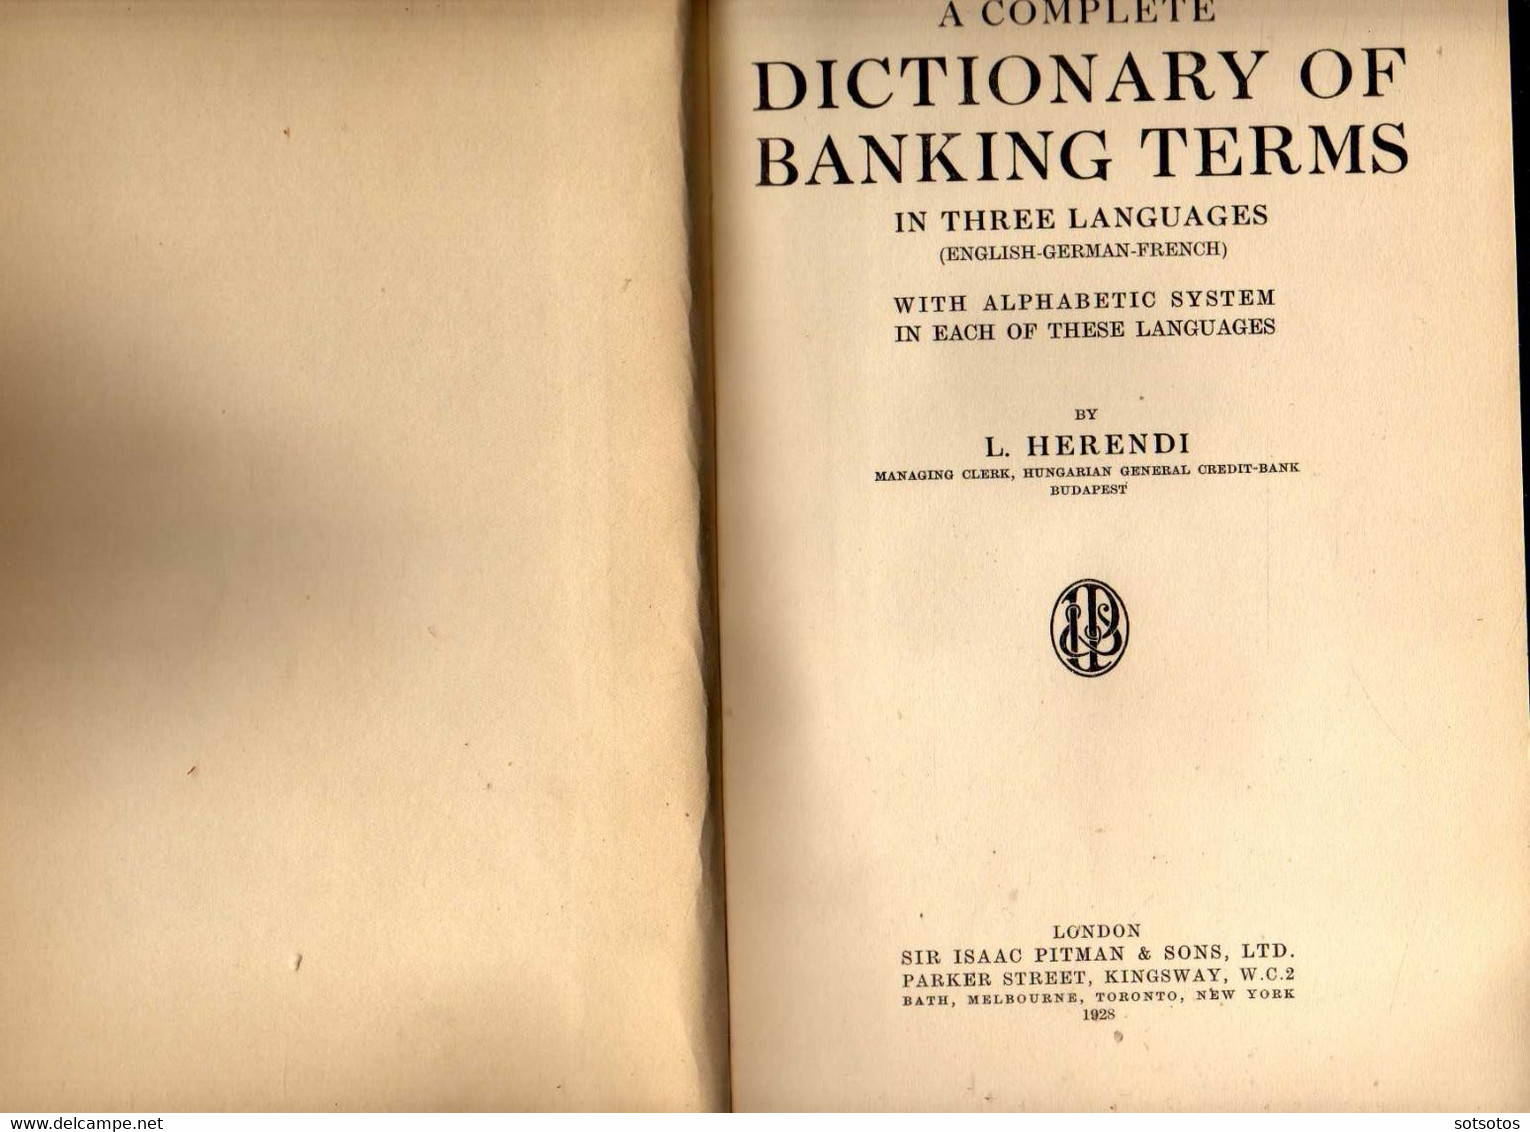 A complete Dictionary of Banking Terms in Three Languages (English – German – French) by L.  Herendi